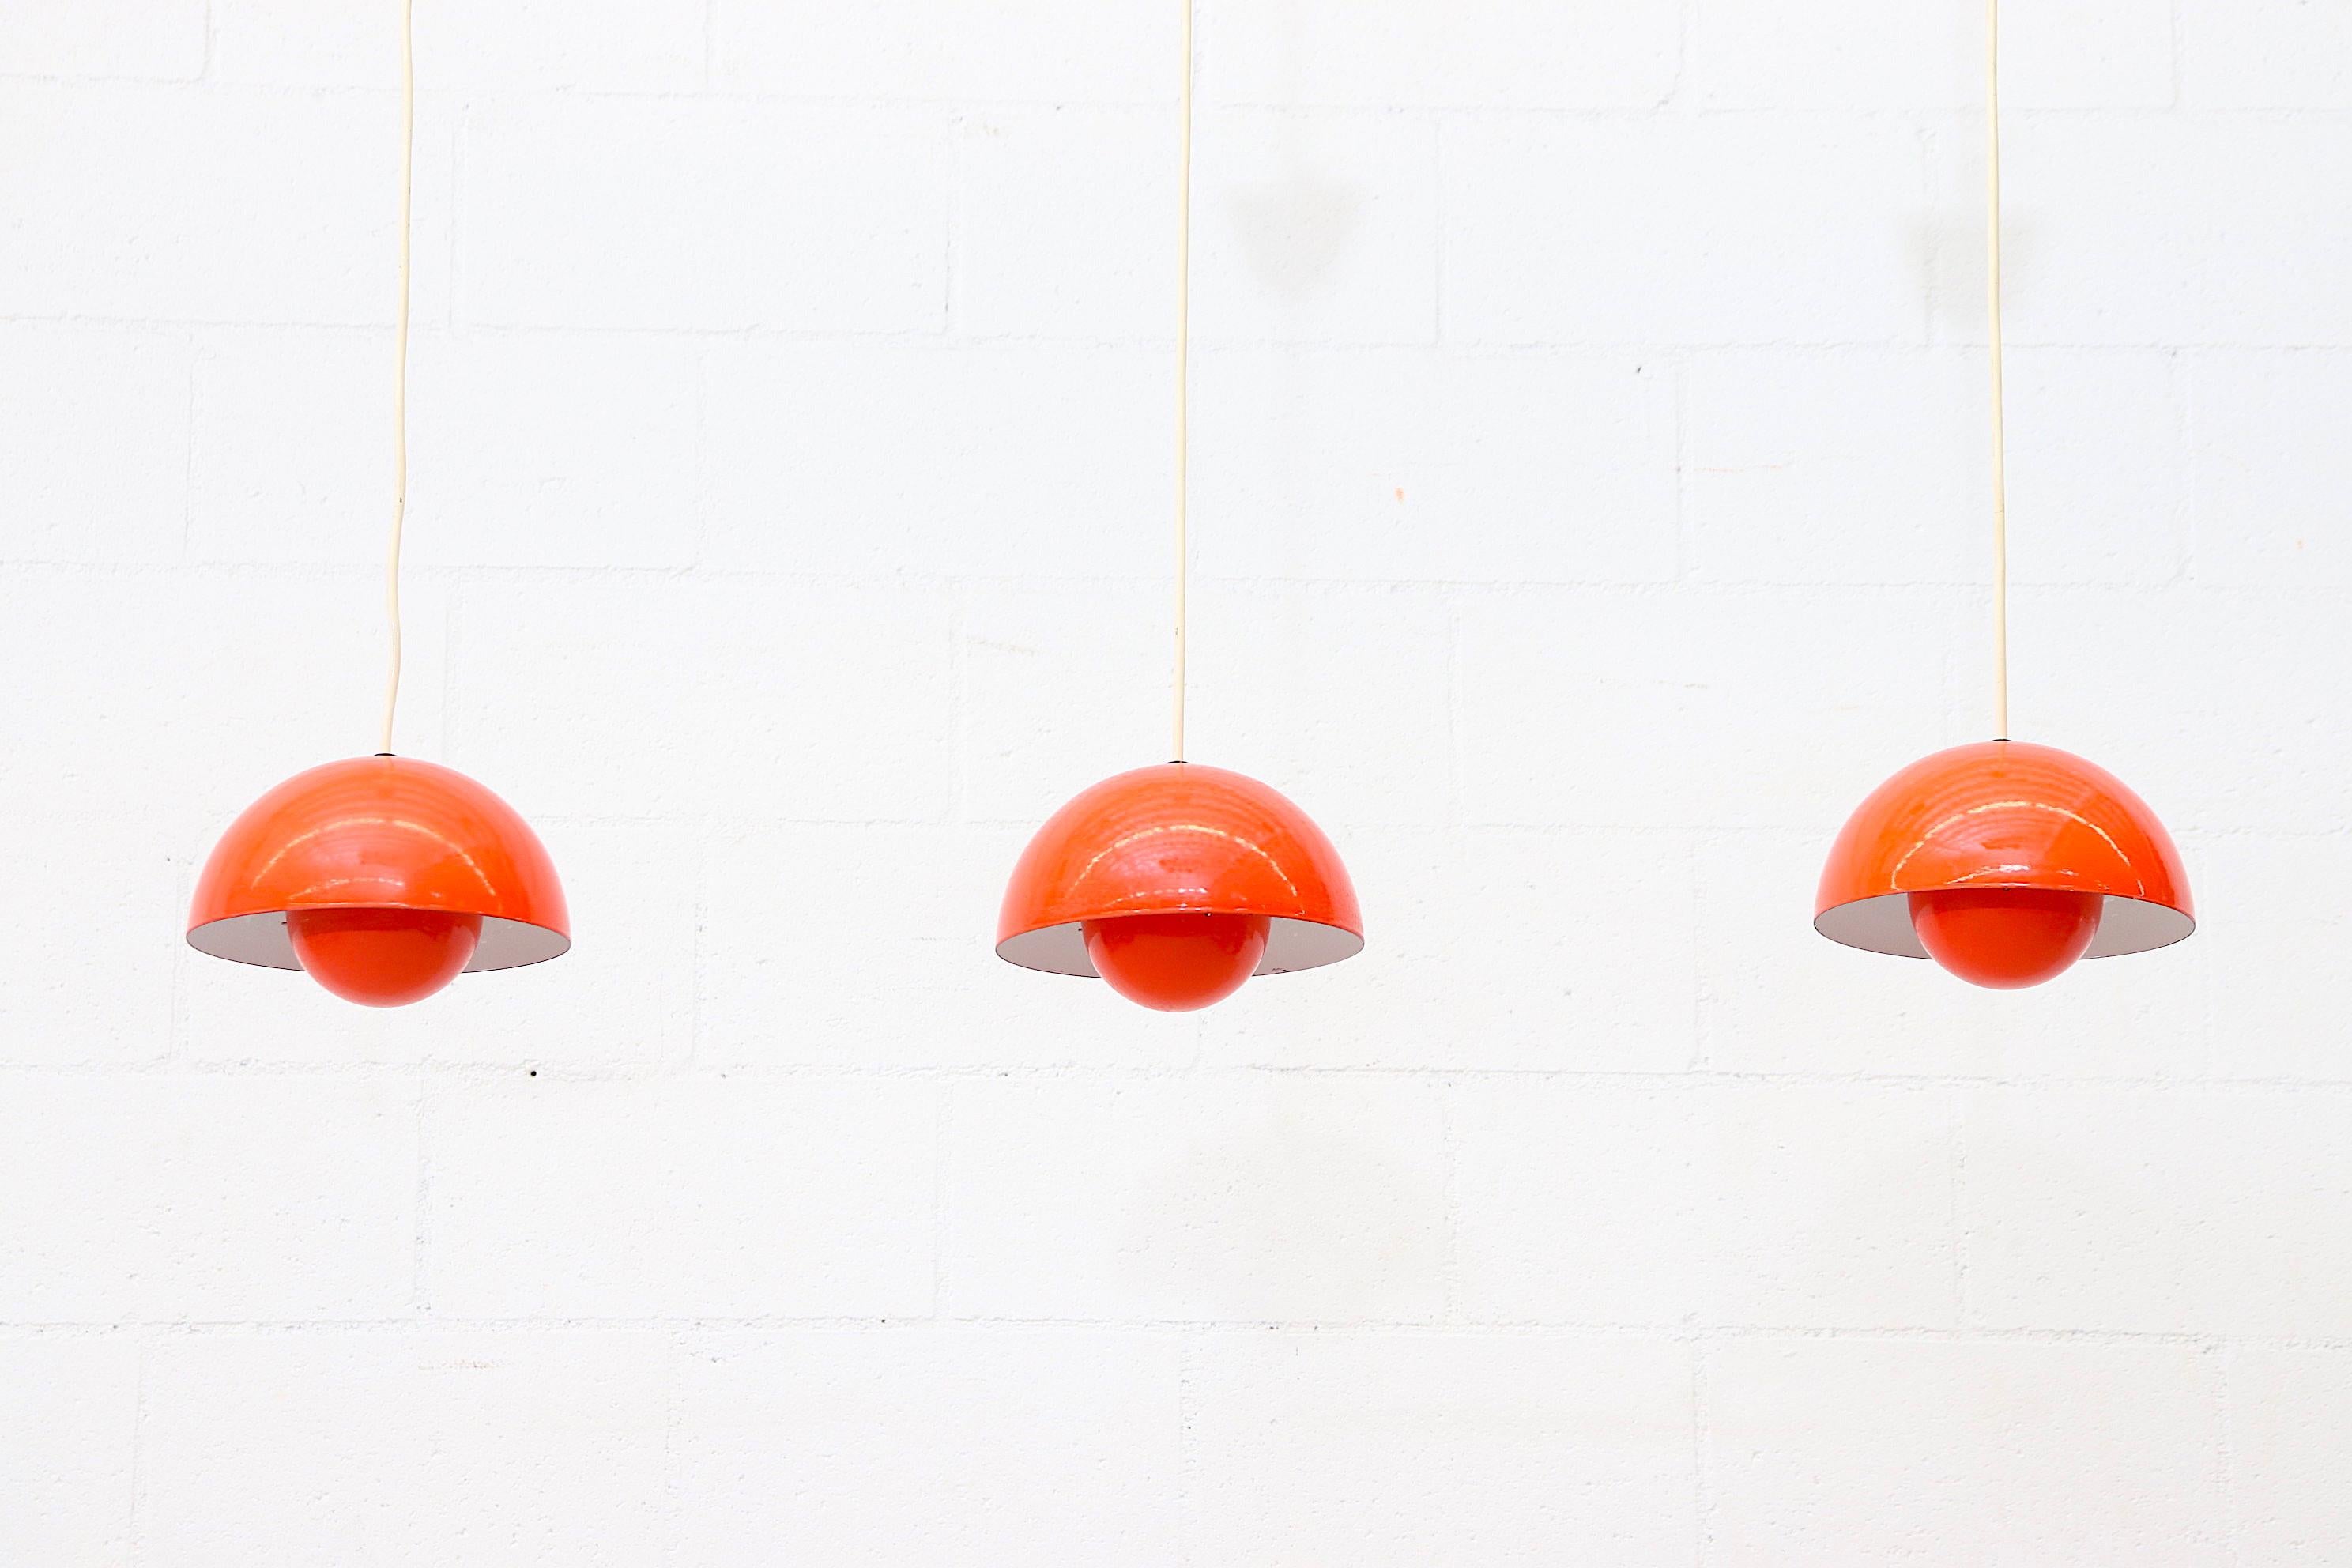 Midcentury Verner Panton flower pot pendant light for Louis Poulsen in 1969, Denmark with Dual orange enameled shades. Designed in the 1960s the shades are connected by metal hooks to complete its futuristic style. In original condition with minimal